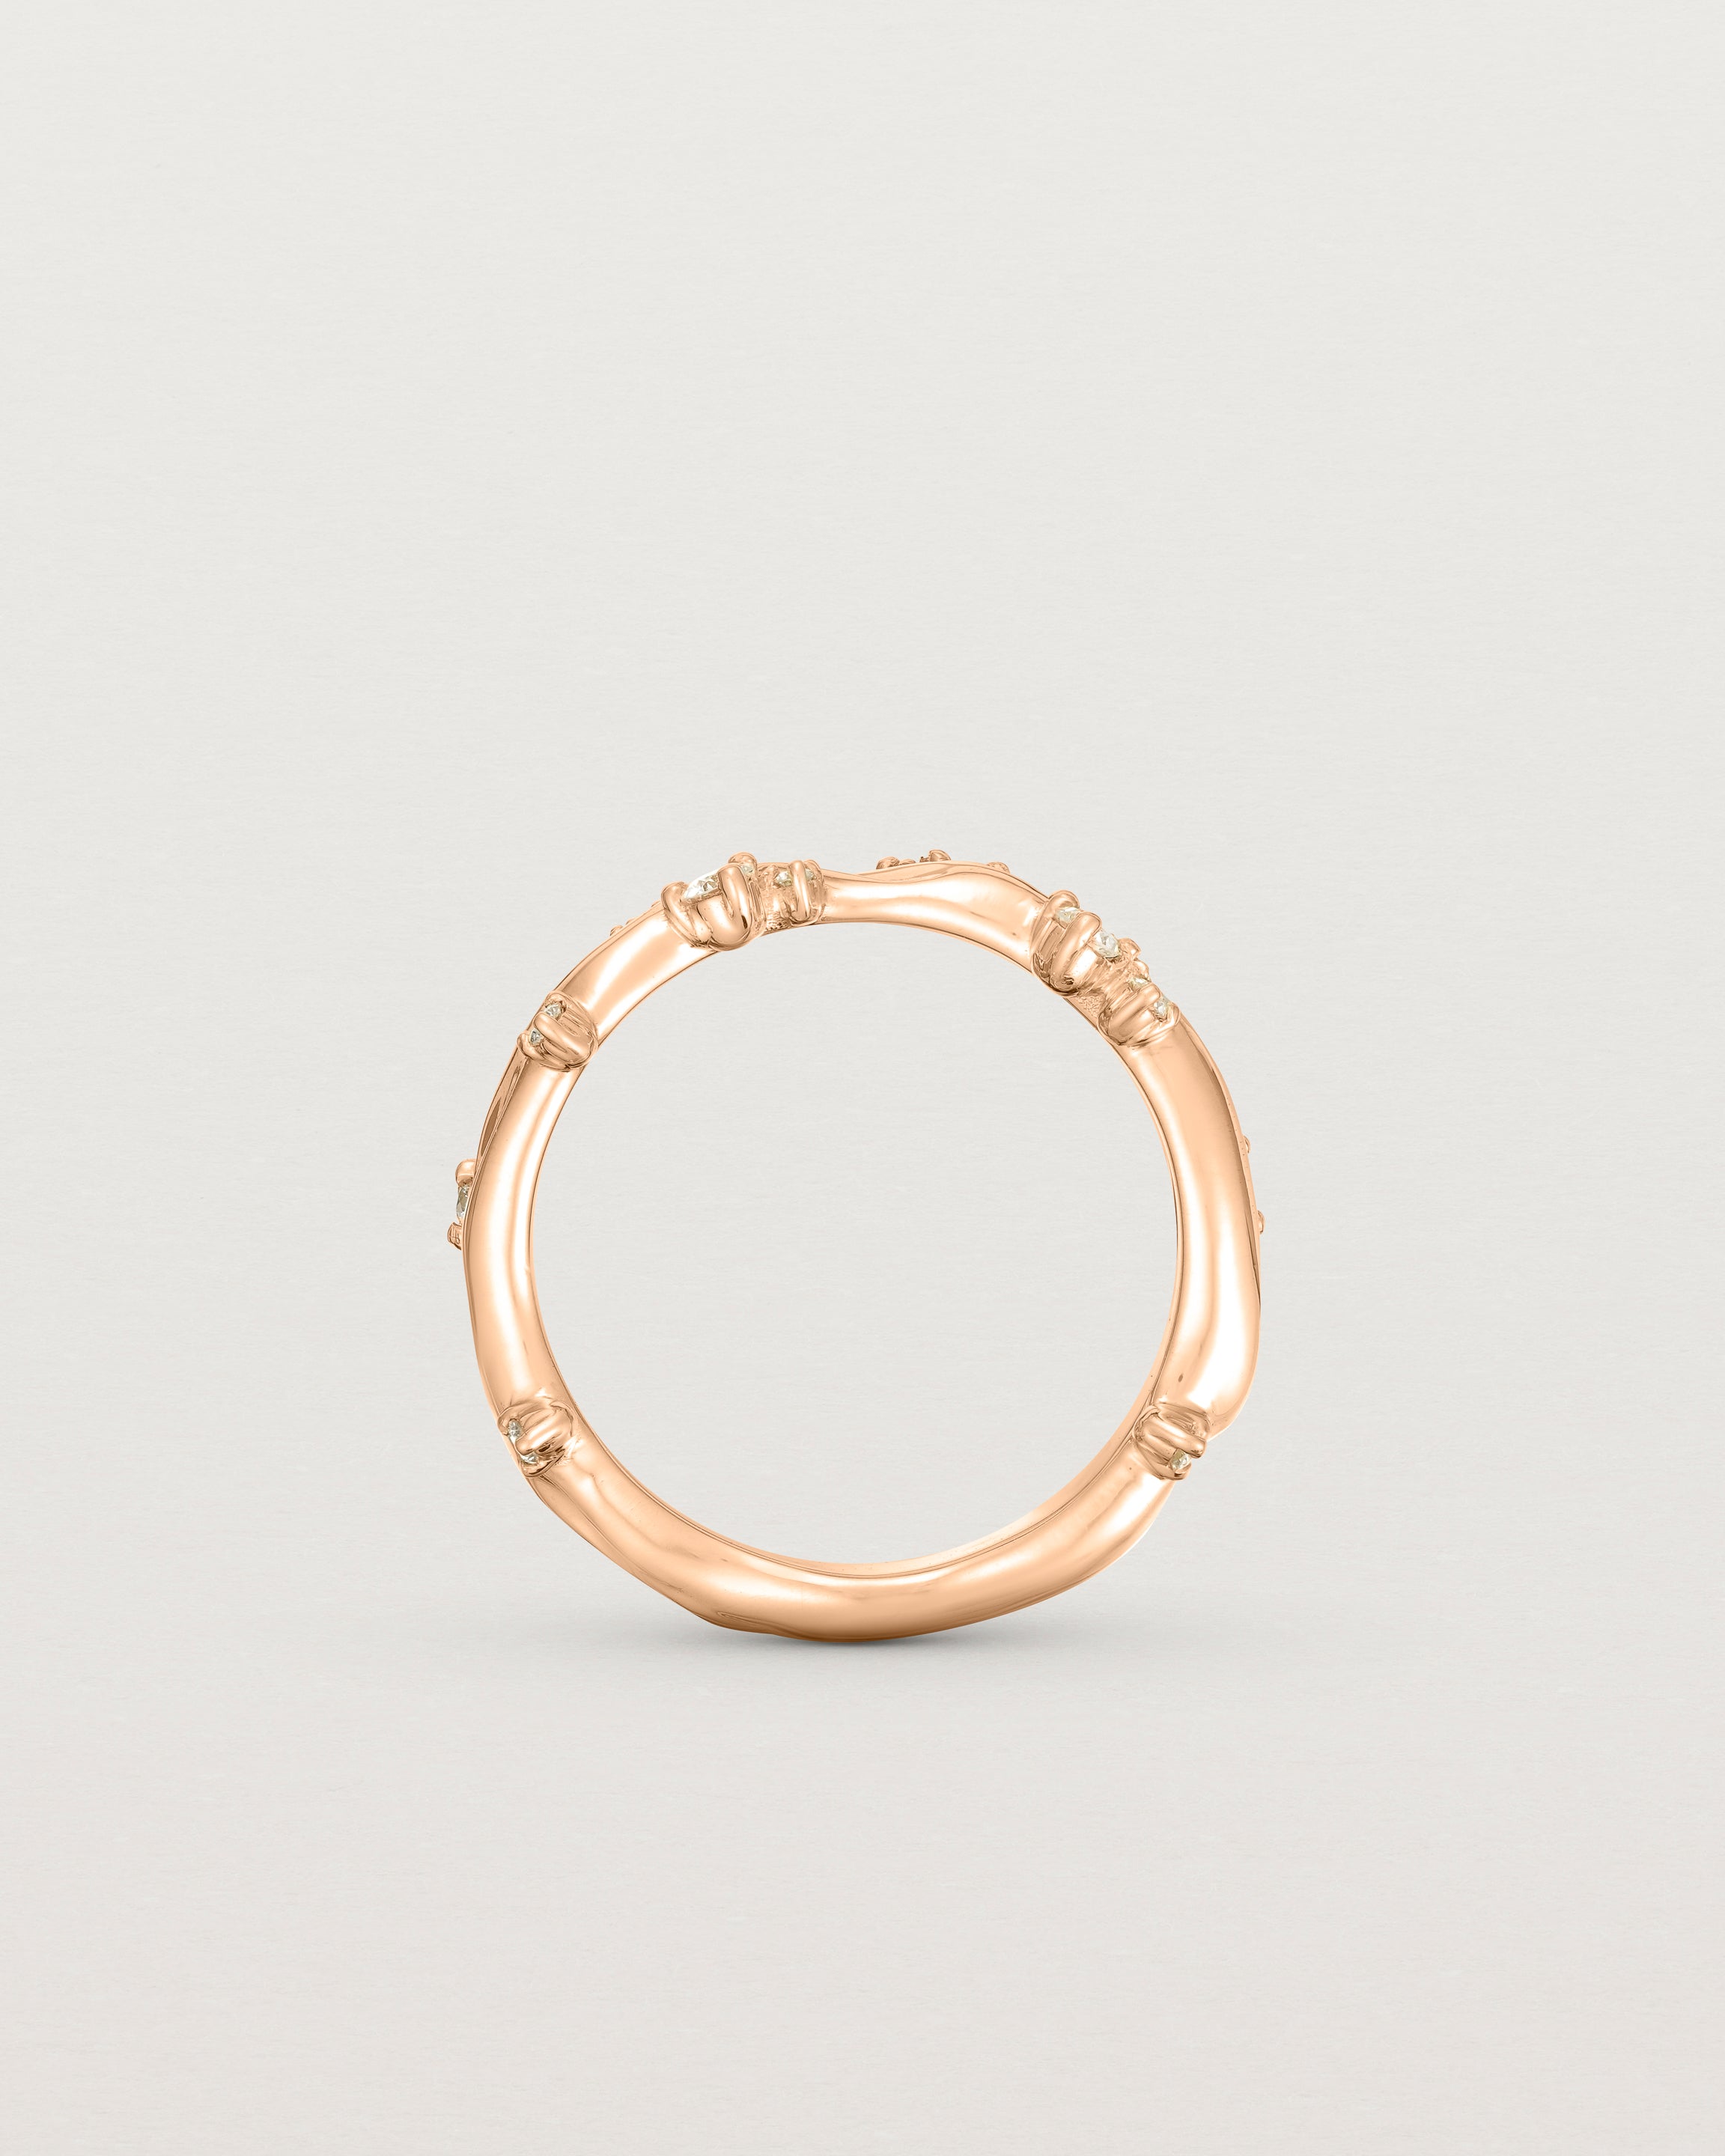 Product photo of the rose gold Ember ring with white diamonds scattered around the band standing up.